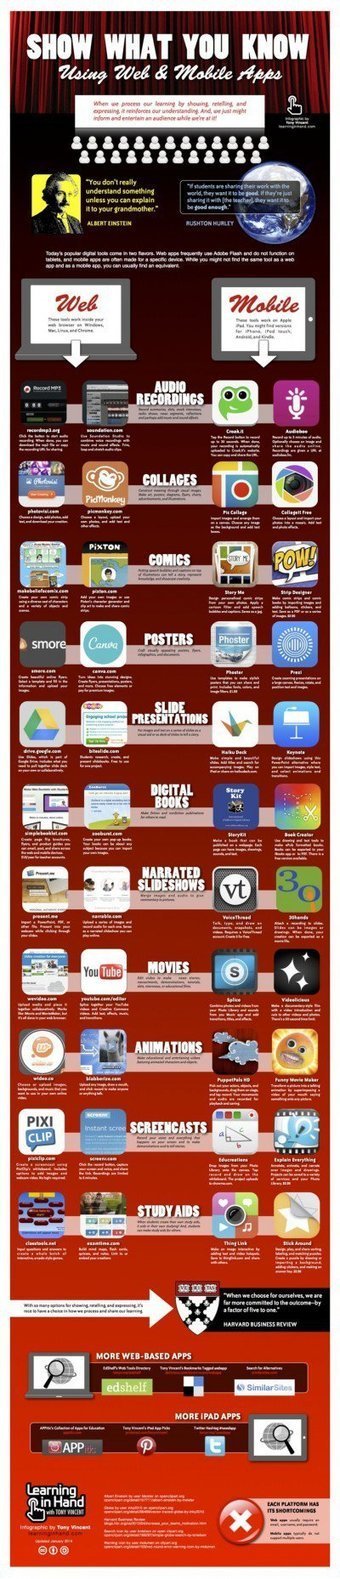 Tech It Up Tuesday: 50 Tools & Apps for Showcasing Student Knowledge | Strictly pedagogical | Scoop.it